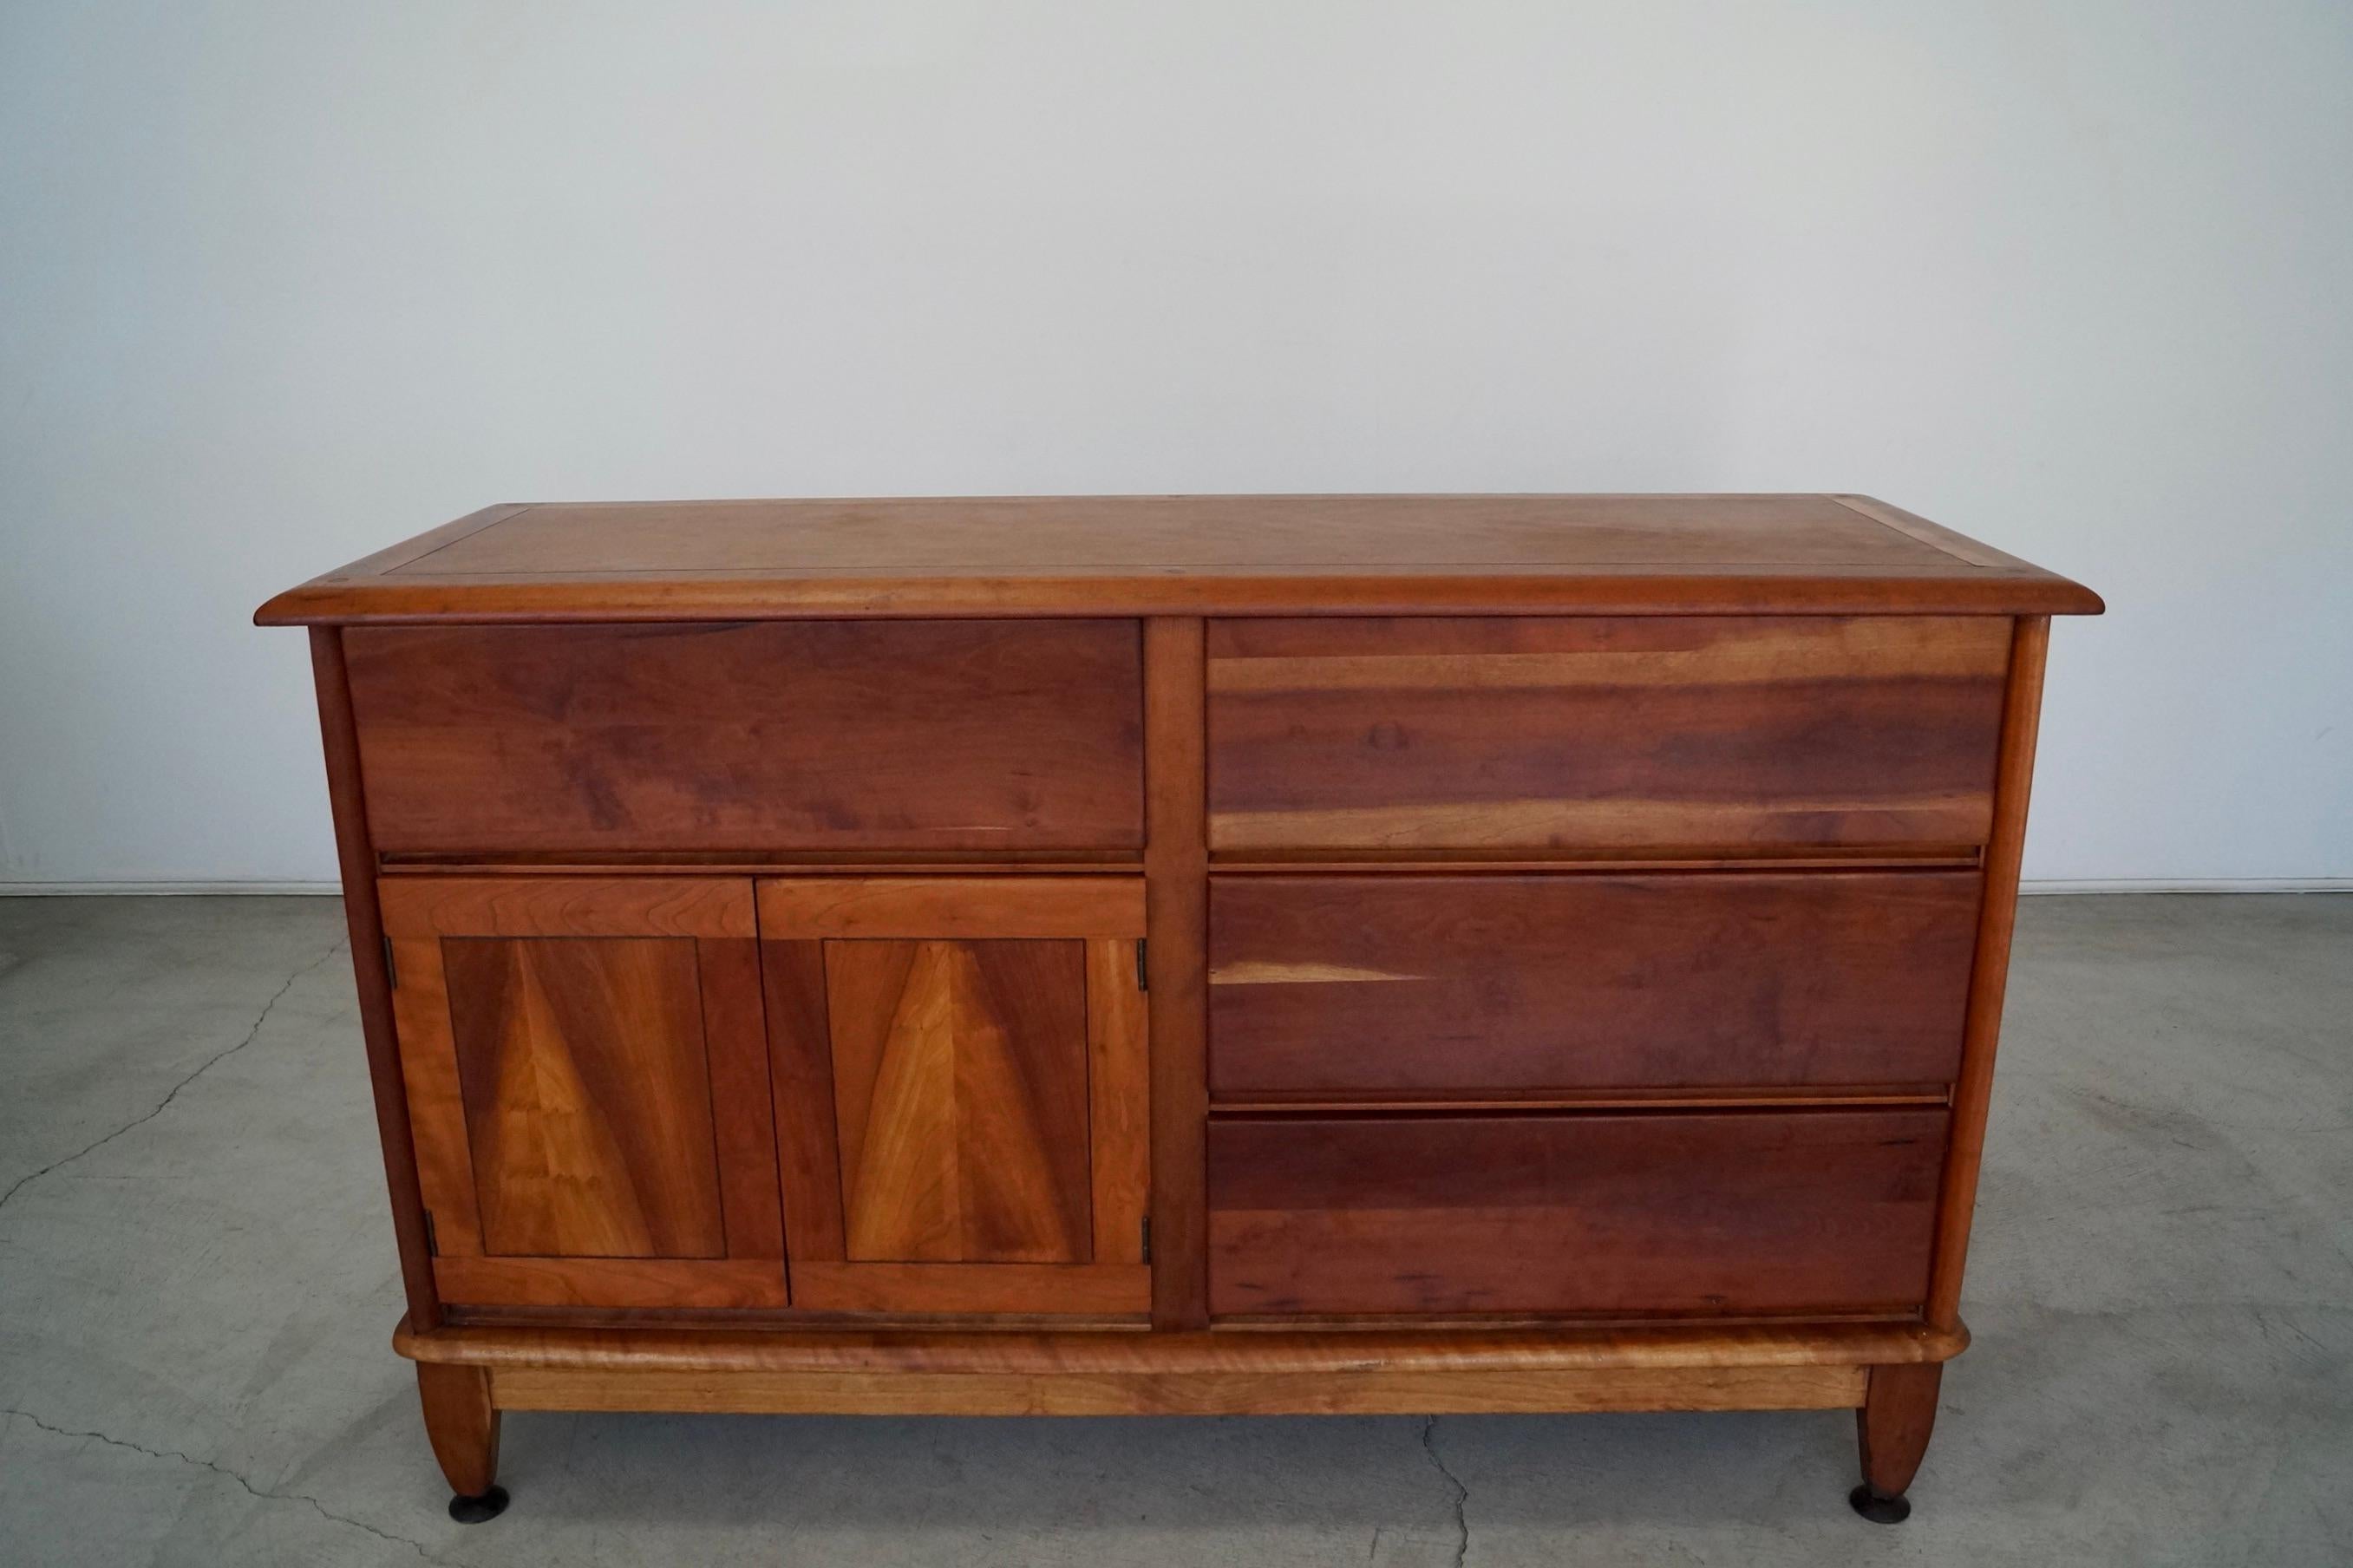 Incredible vintage Mid-century Modern credenza for sale. From the late 1940's, and manufactured by Morris of California. It still has the Morris stamp, and is made of solid cherry wood. There are absolutely no veneers or particle wood in the